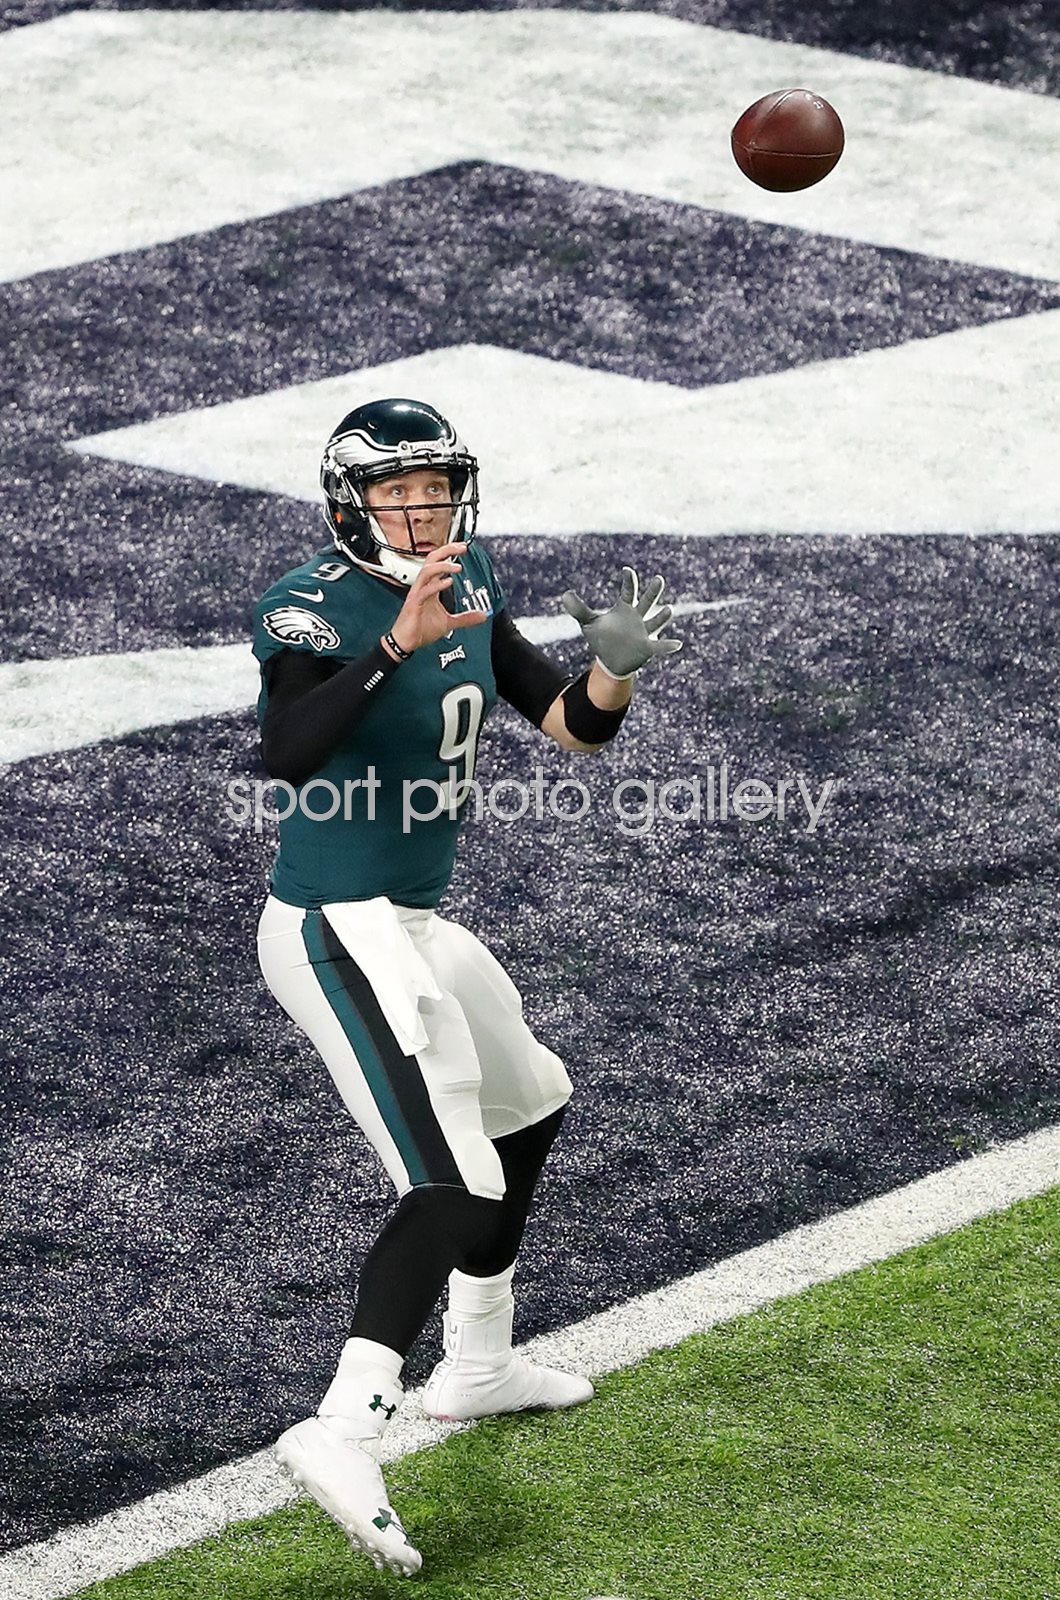 nick foles eagles jersey youth